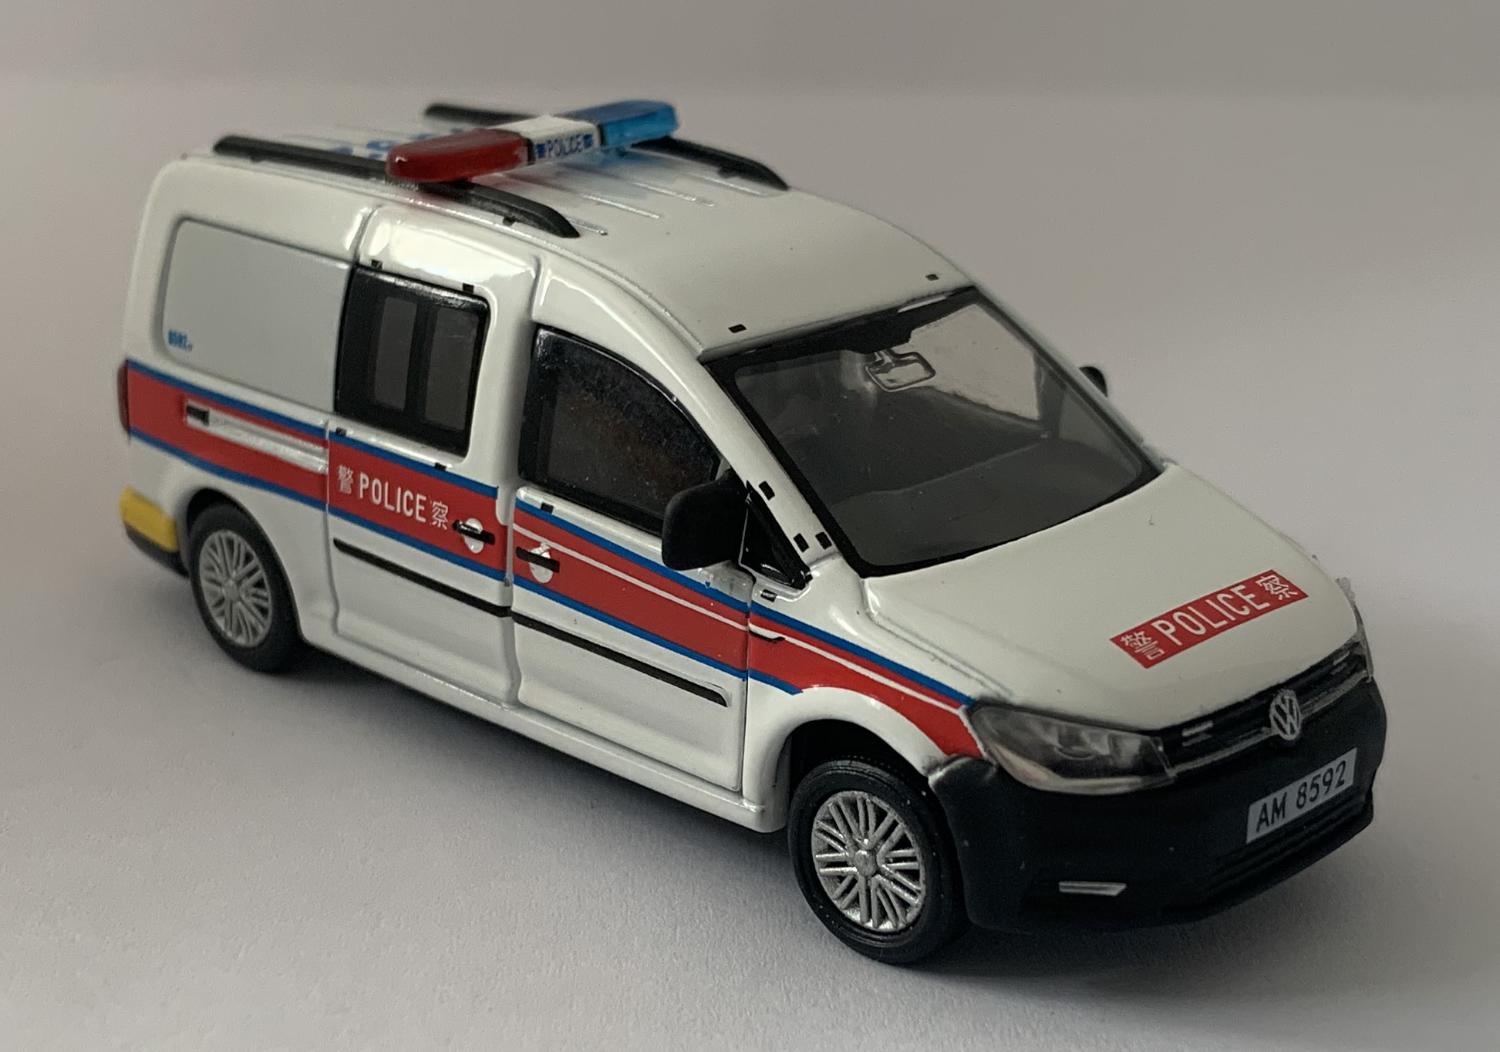 VW Caddy Hong Kong Police 1:64 scale police van model from Tiny